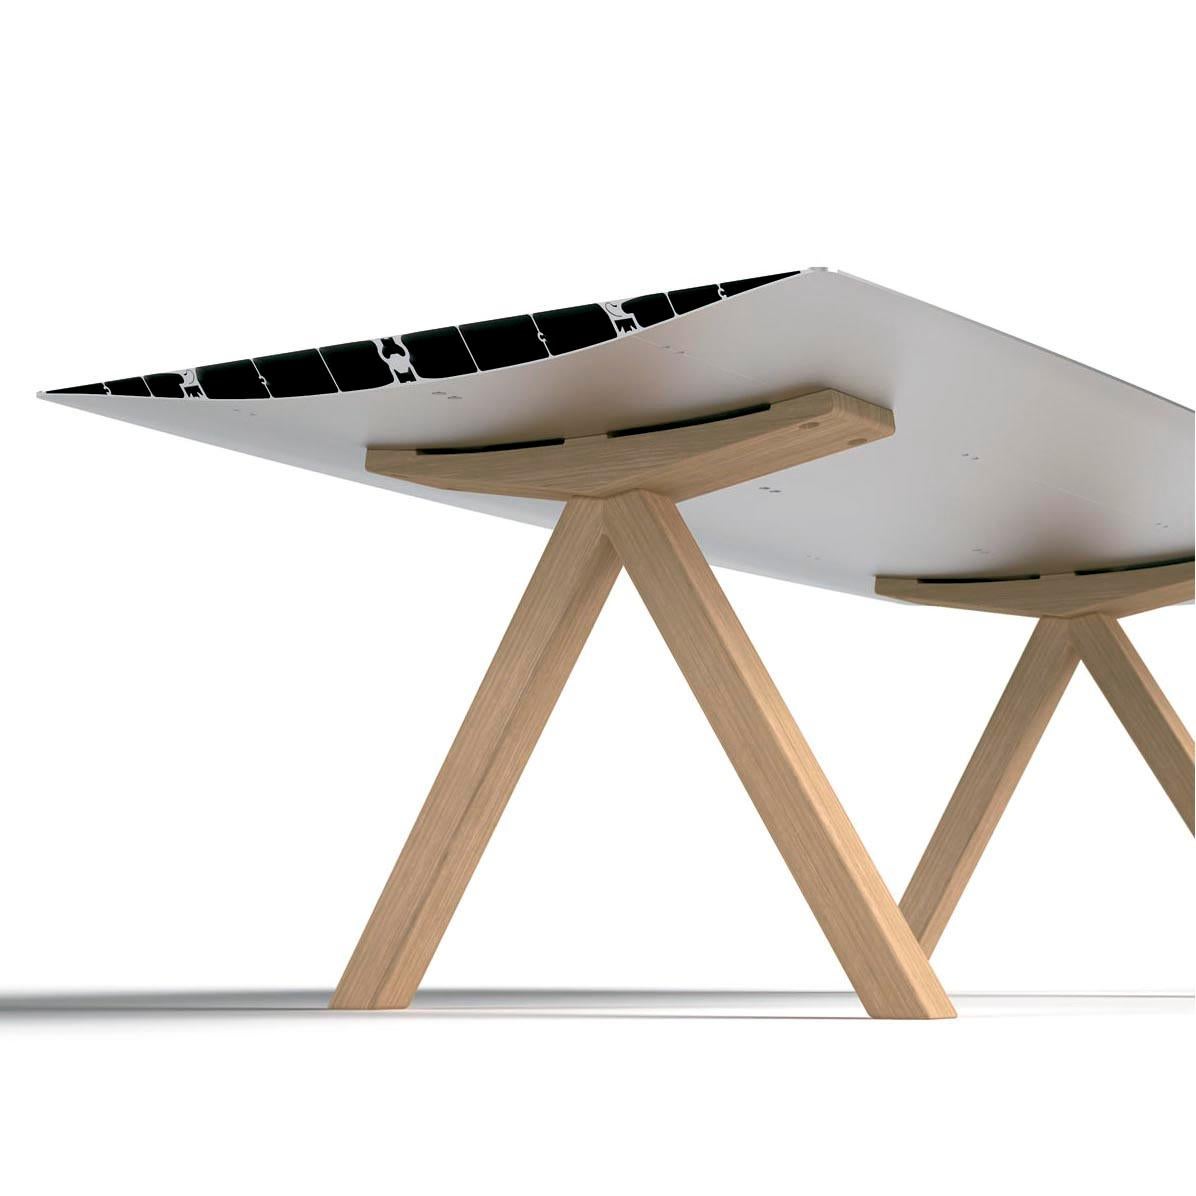 Top in bevel edged extruded aluminium. Surface laminated in oak effect. Natural ash wooden legs.

Measures: 120 D x 360 W x 73.5 H cm.

Reddot design award best of de best 2011.

Tabletop in extrusioned aluminium with open ends cut at 45º.